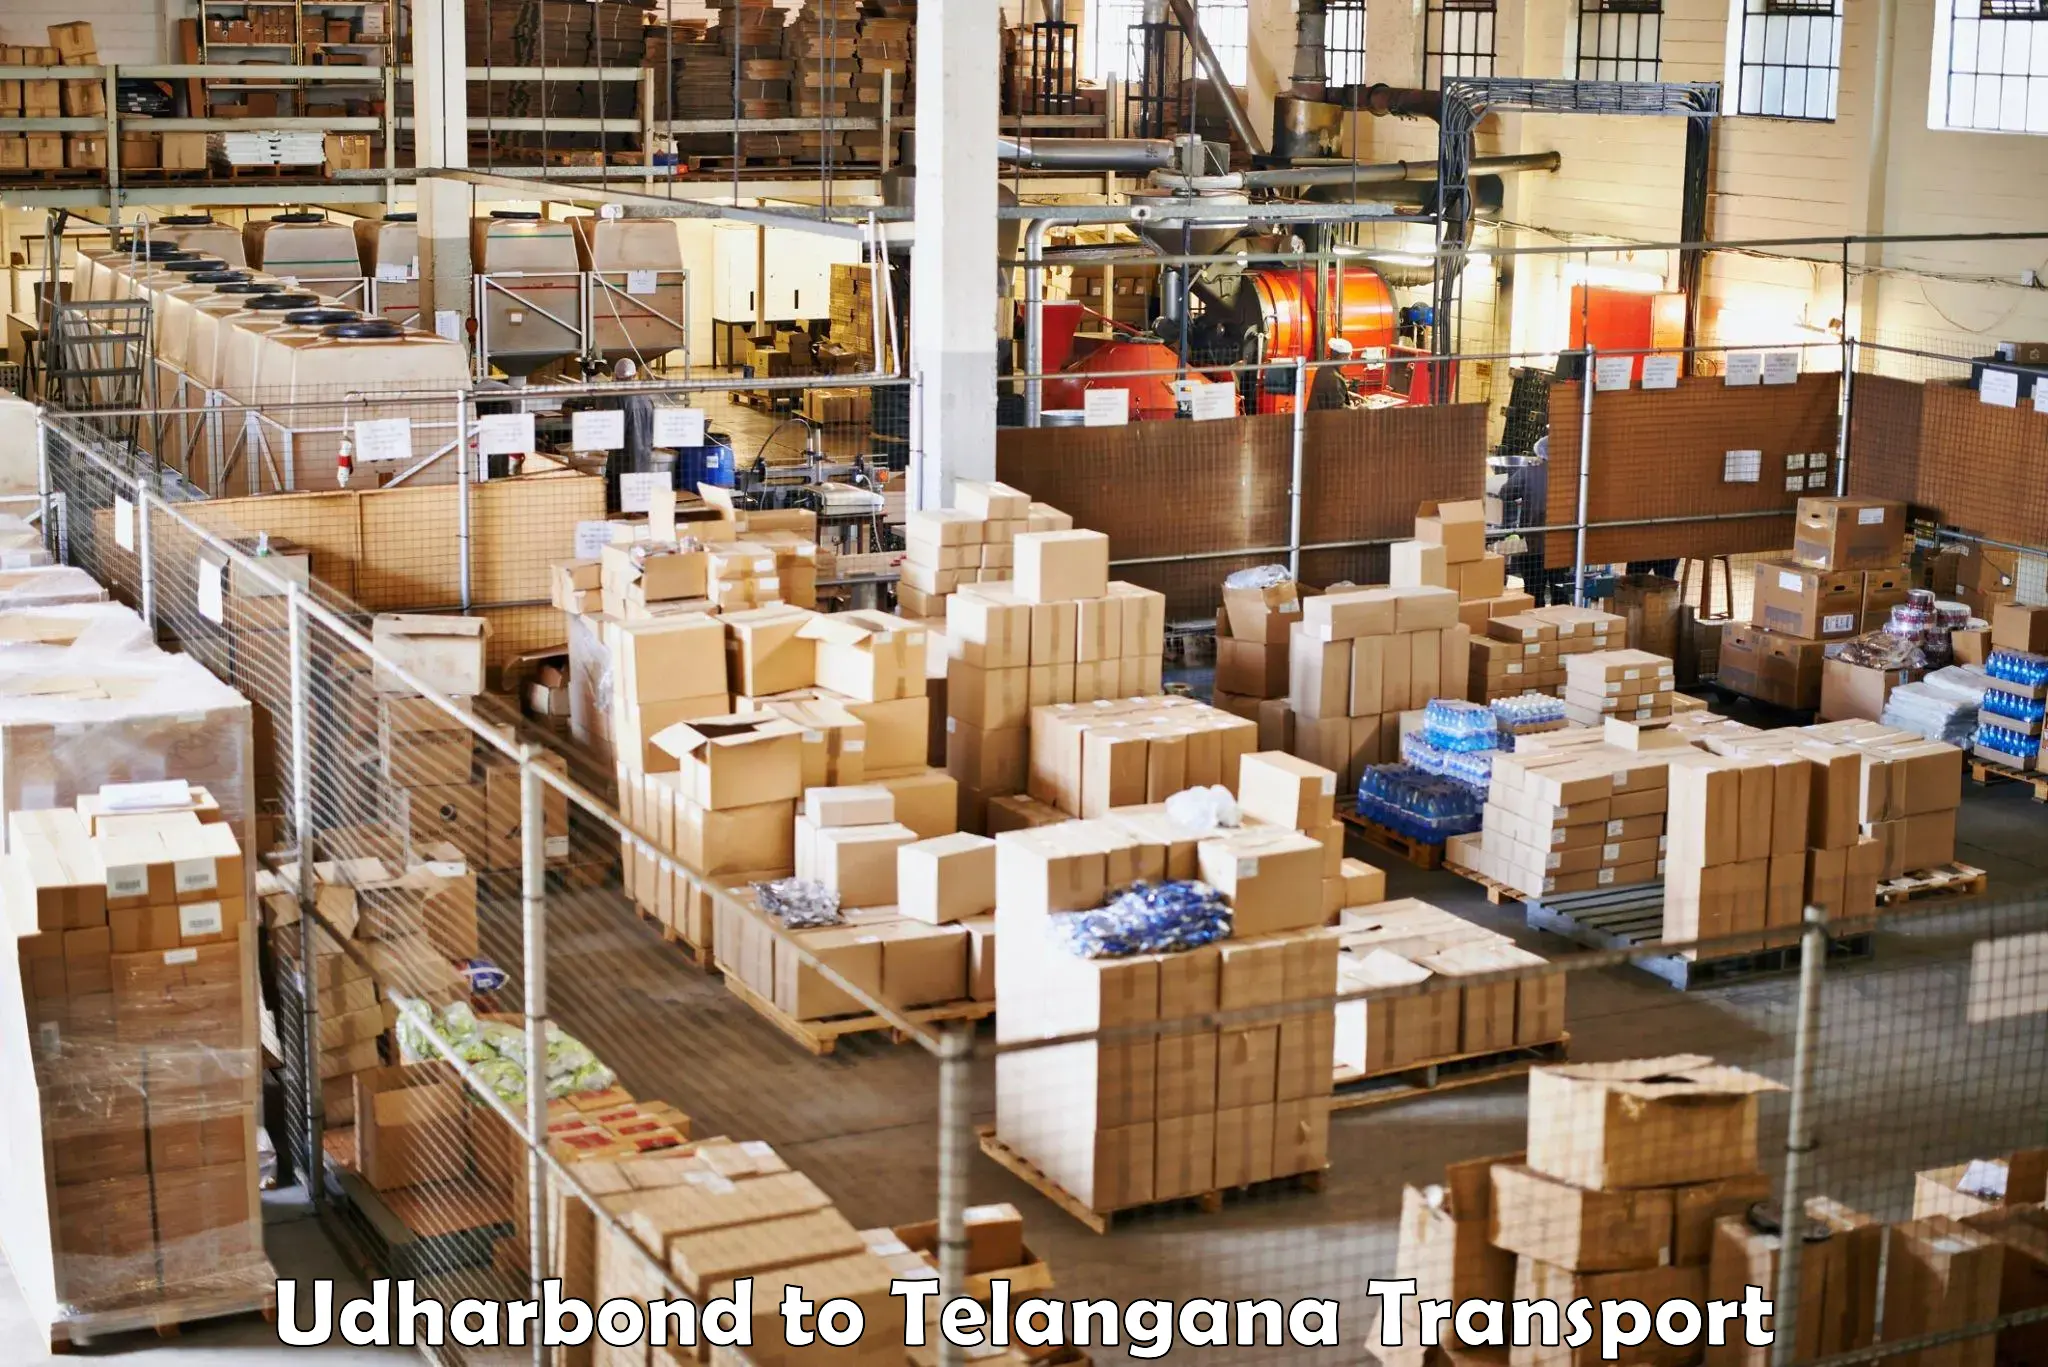 Transport shared services in Udharbond to Telangana